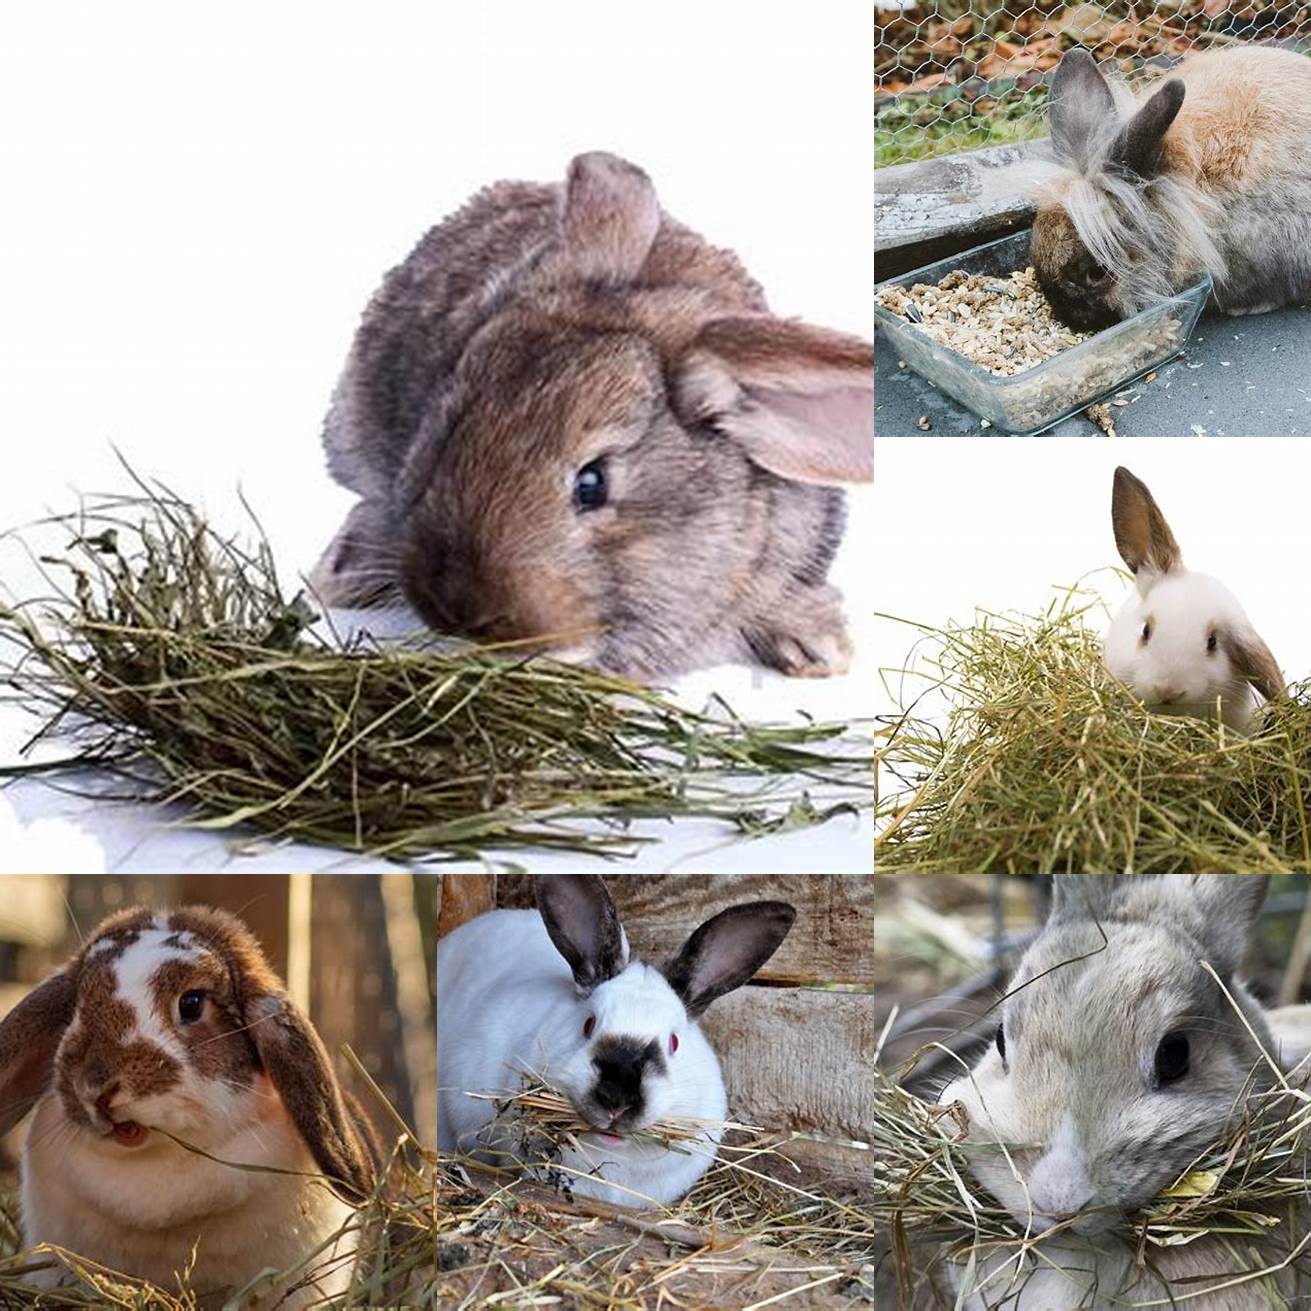 Image of a rabbit eating hay